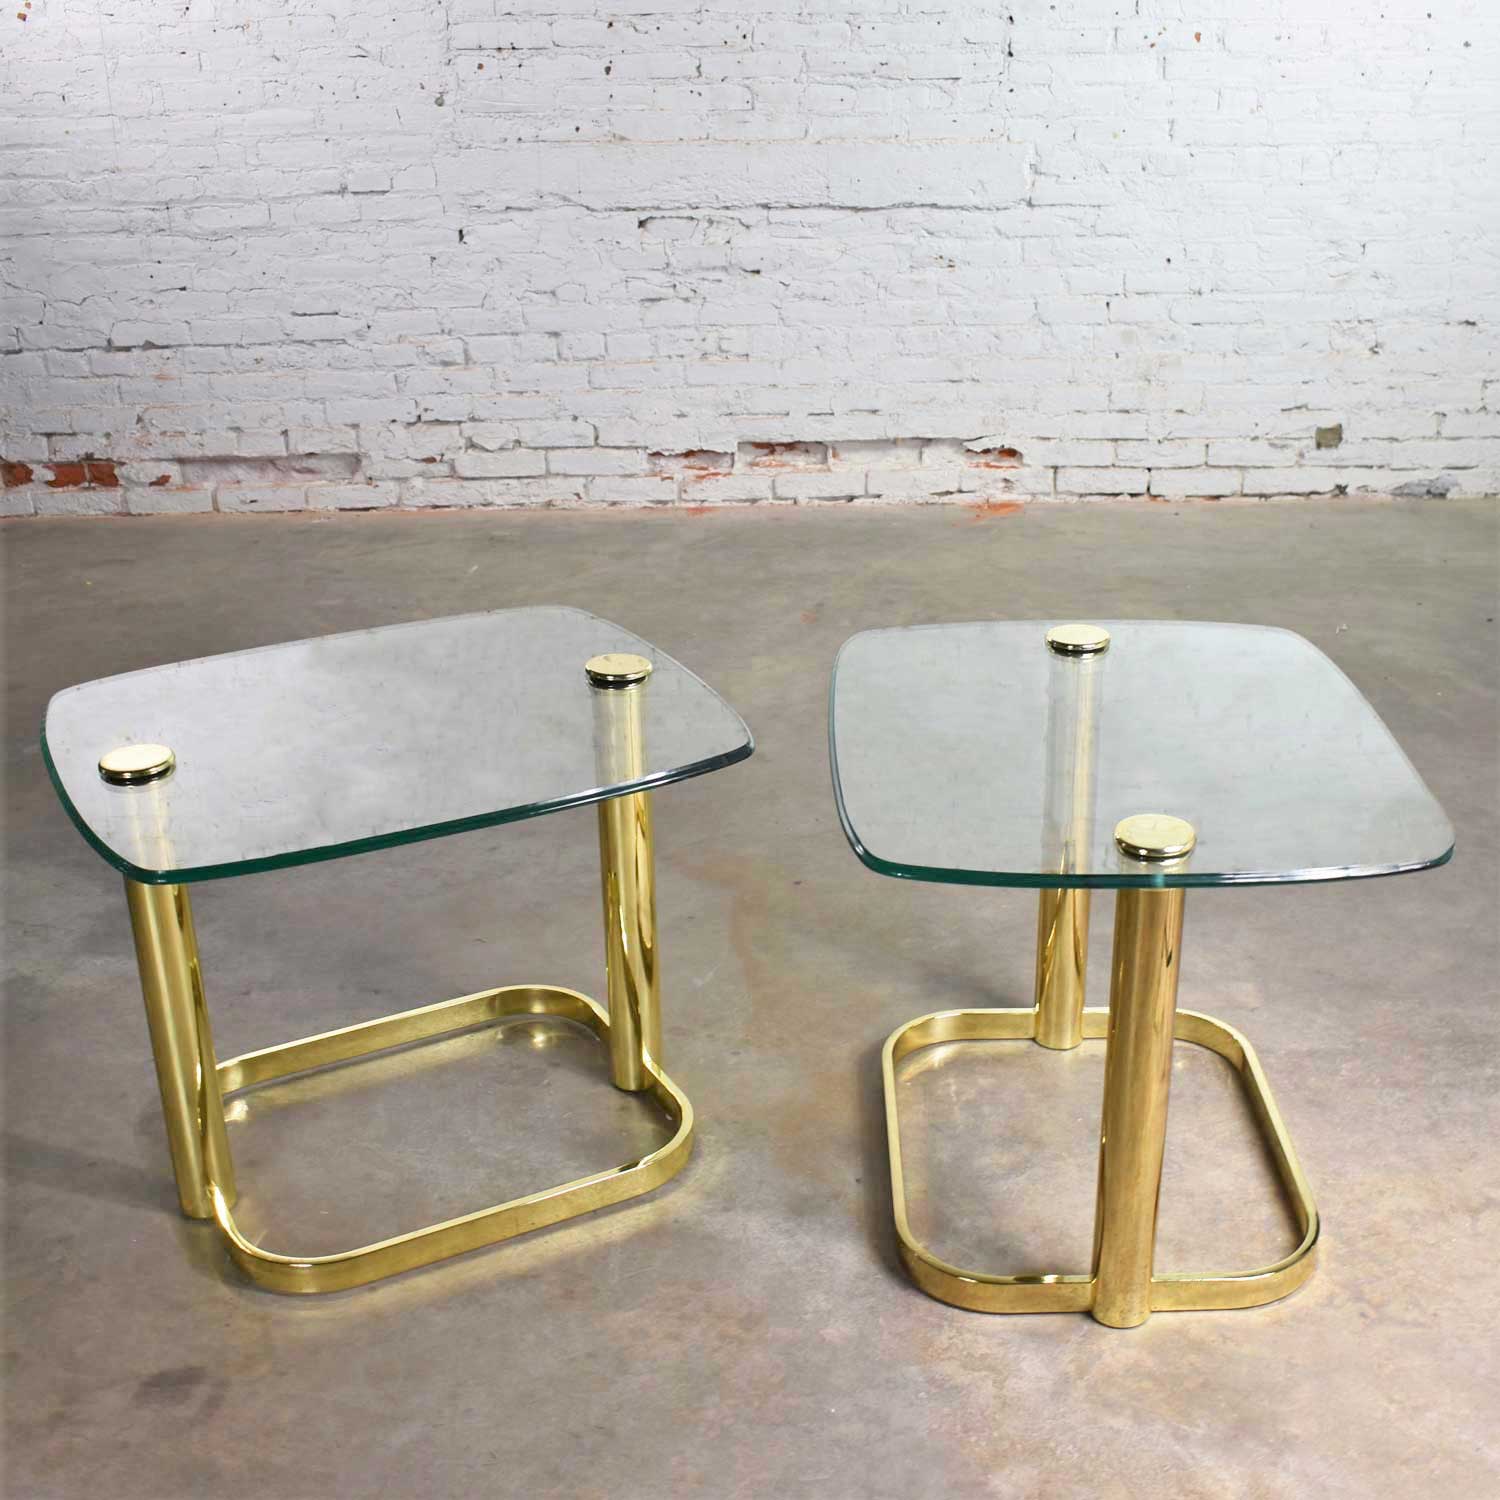 Modern Pair of End Tables Brass Plate and Glass Attributed to Leon Rosen for The Pace Collection